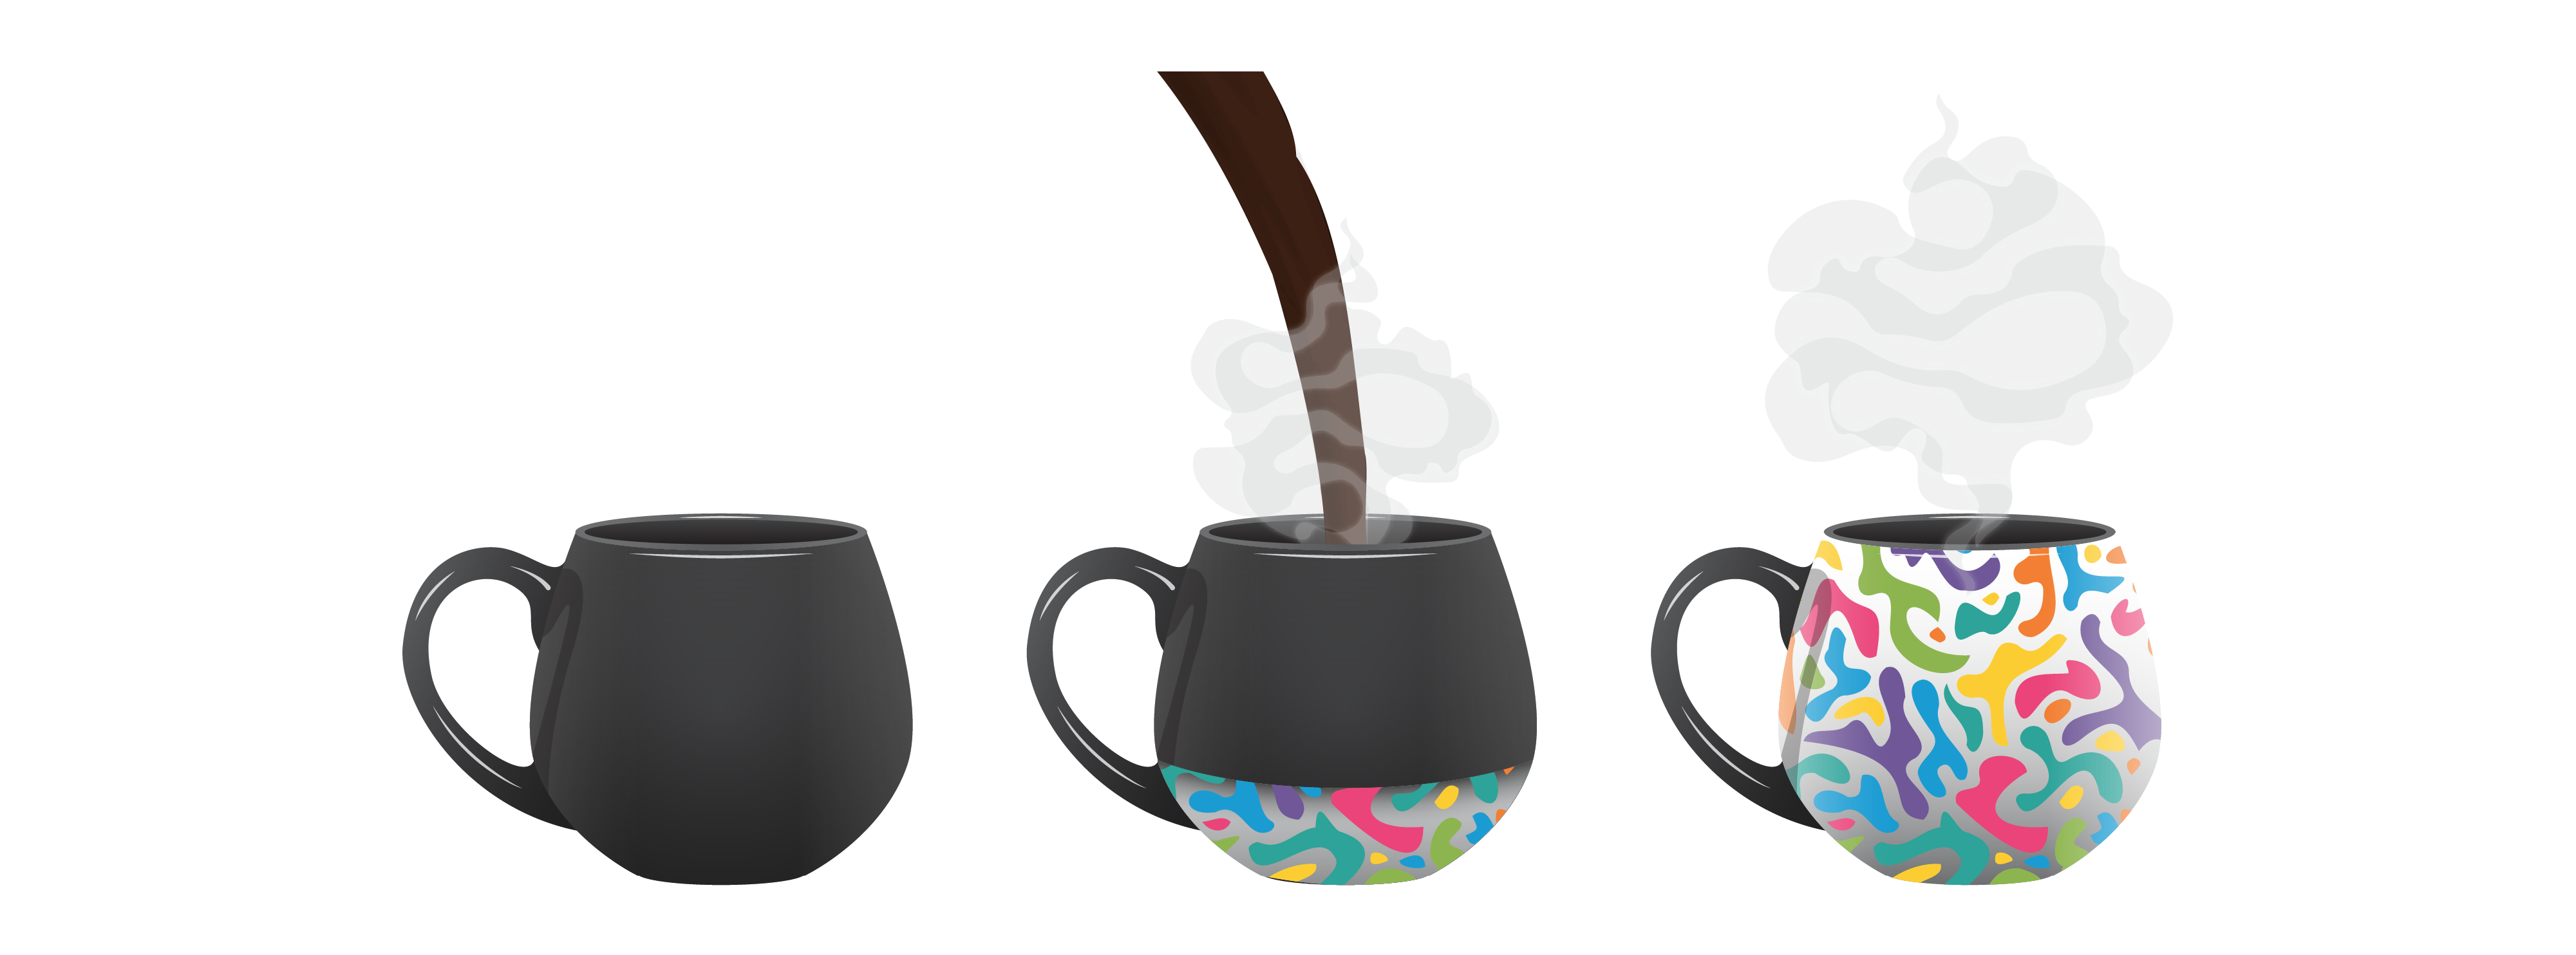 A heat-sensitive responsive skin is shown on a mug. In the first scenario, the mug is black and empty. In the second scenario, the mug is being filled with a hot liquid. As it fills, the mug changes from black to a colourful pattern. In the third scenario, the mug is full with steam being emitted from it. It is fully covered with the pattern now.